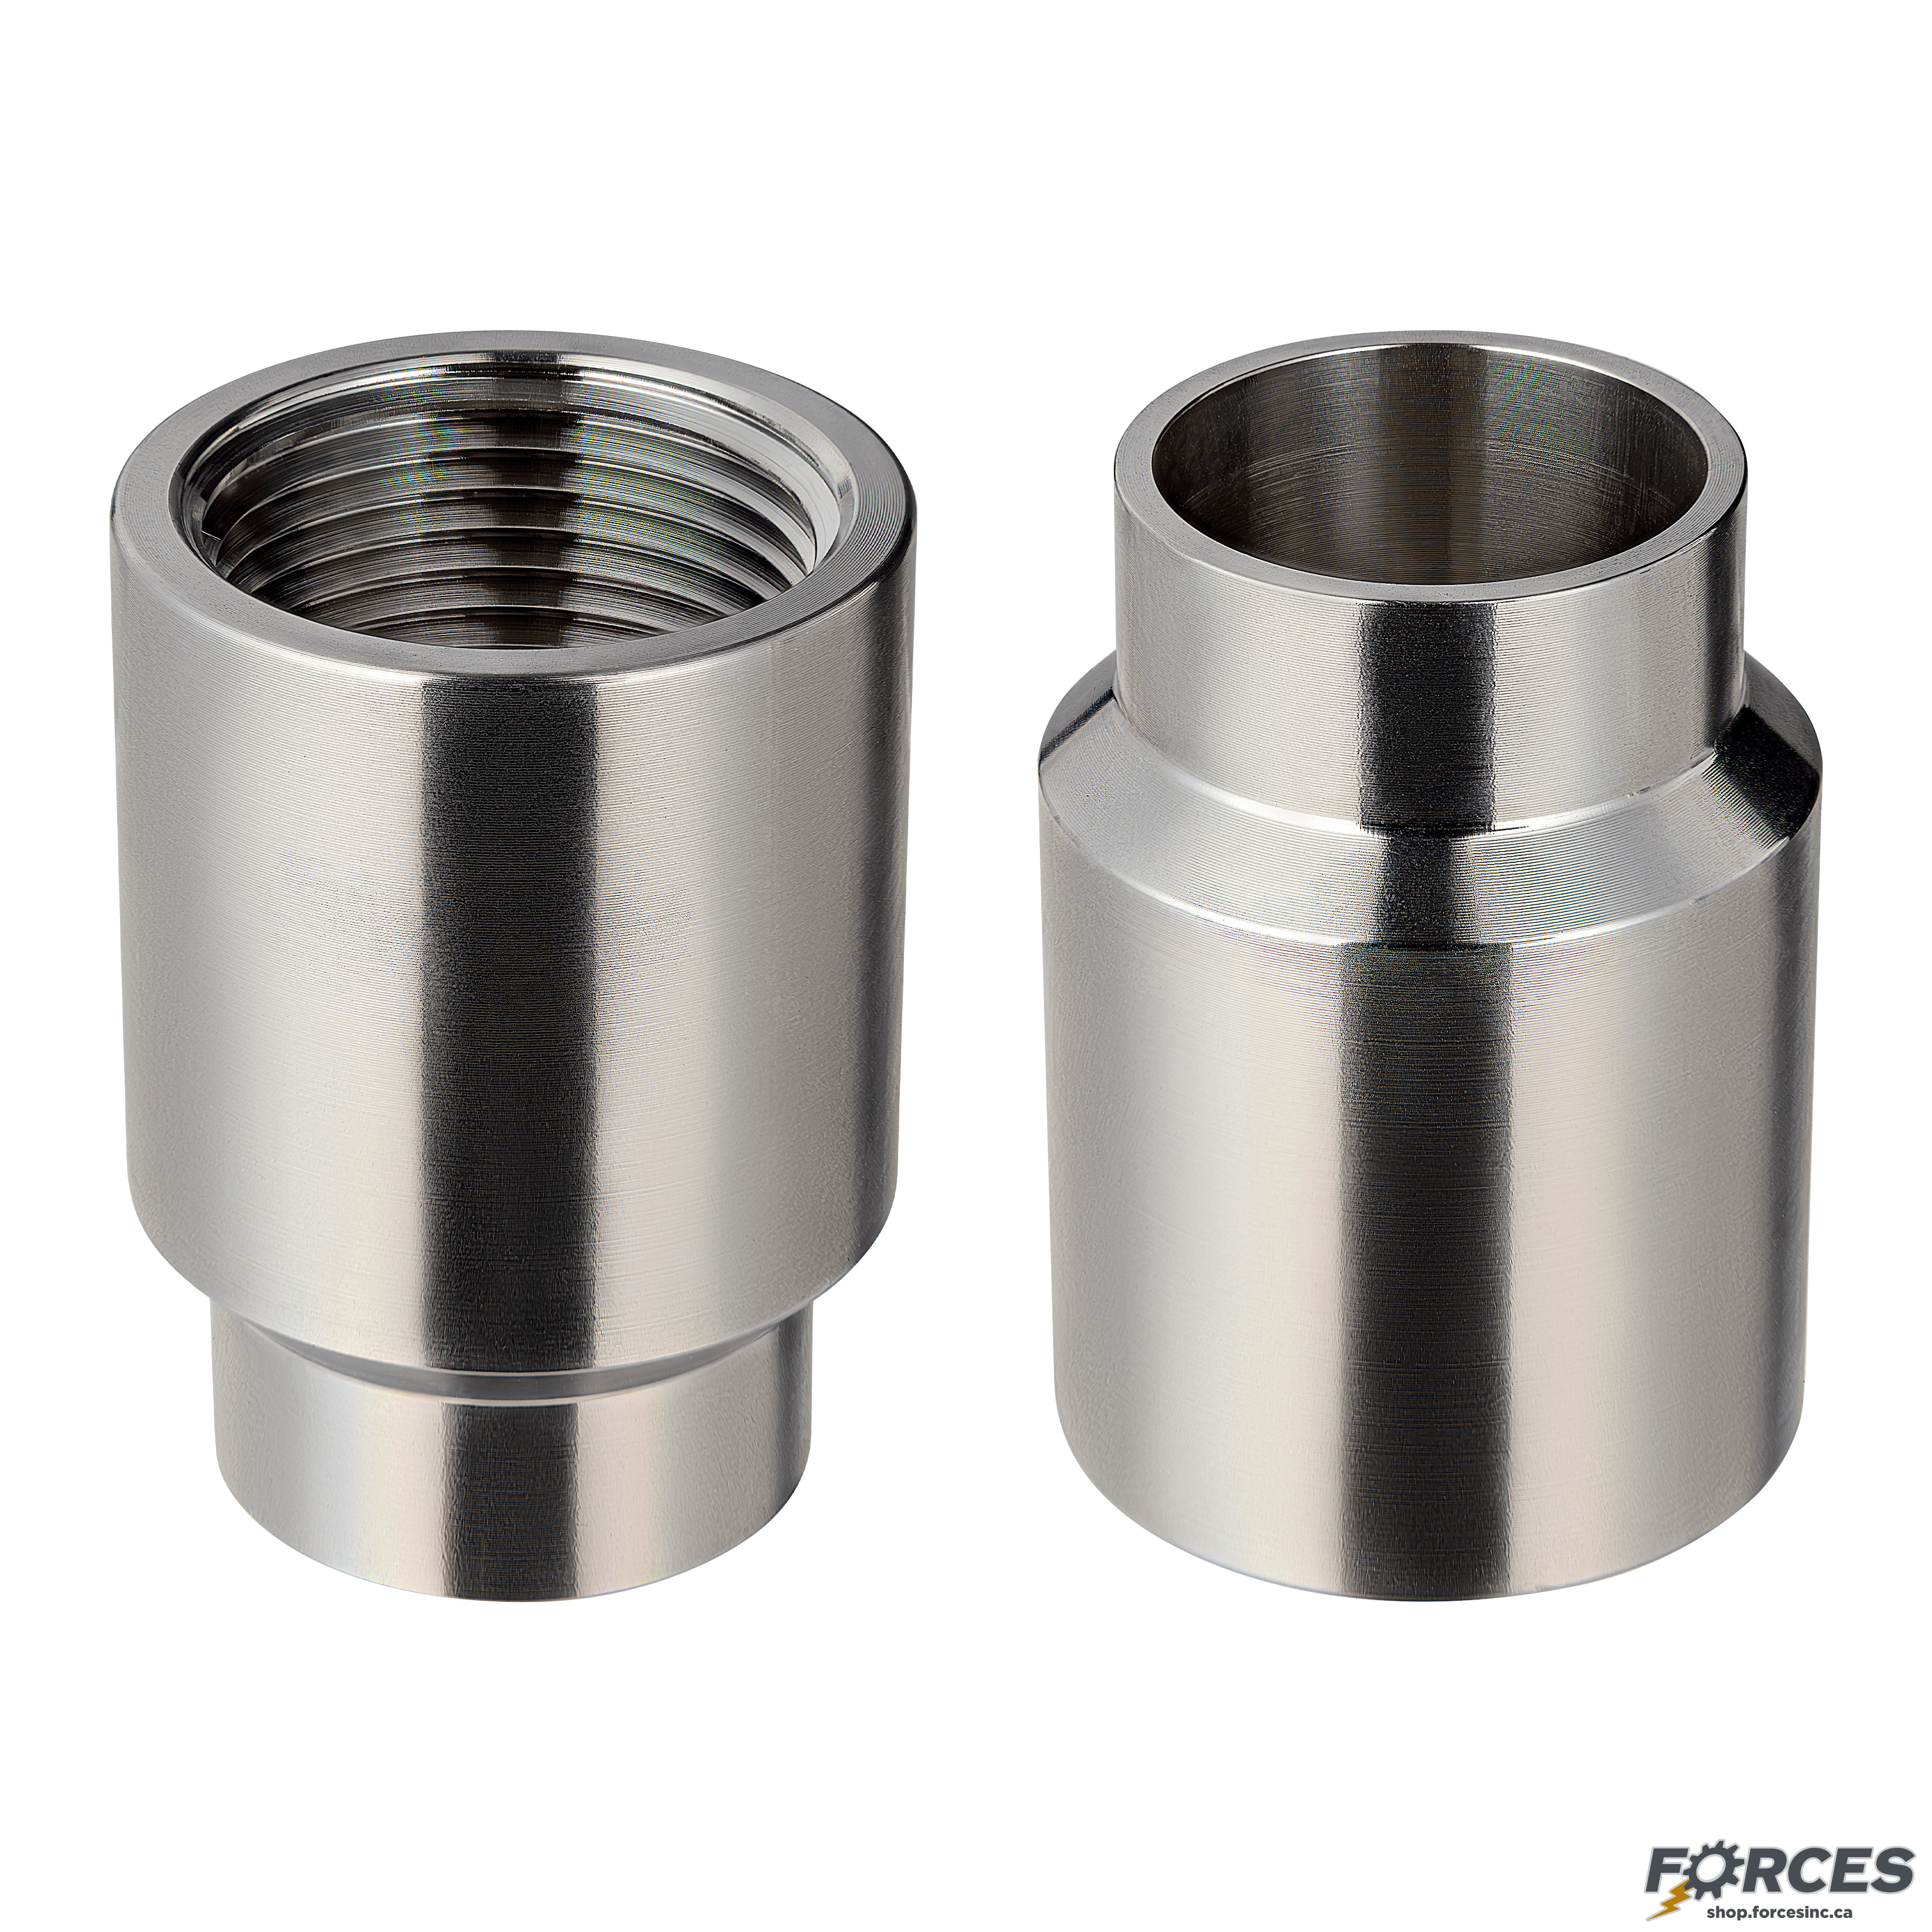 2" x 1-1/2" Butt Weld x Female NPT Adapter - Stainless Steel 316 - Forces Inc